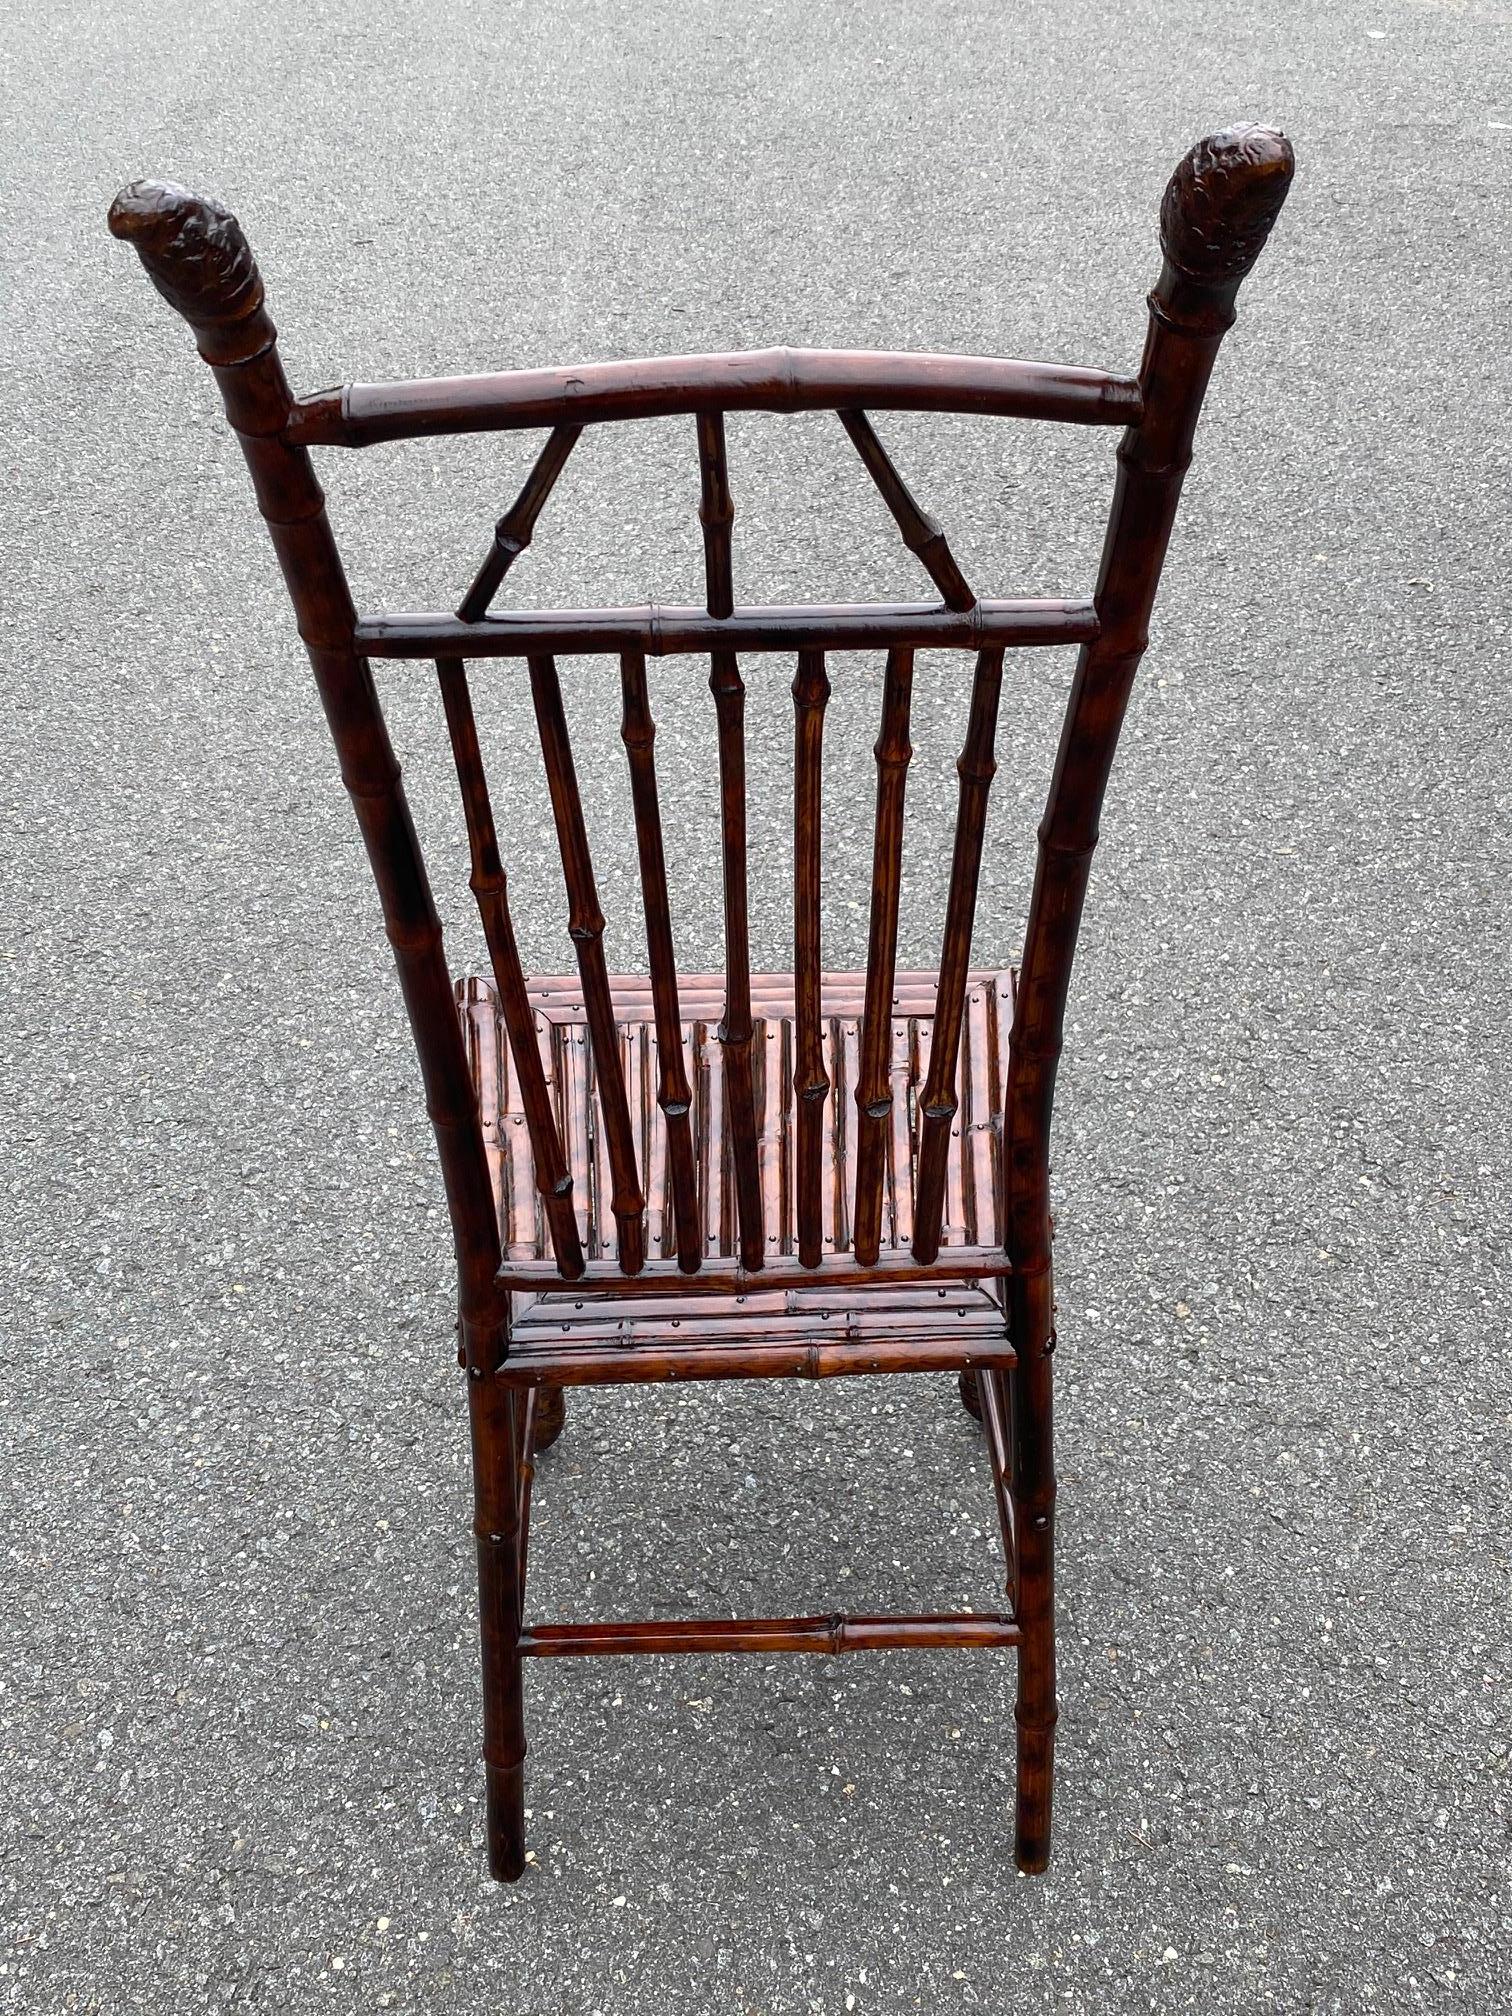 Wonderful bamboo side chair having a warm faux tortoise finish. Makes a great desk chair.

  